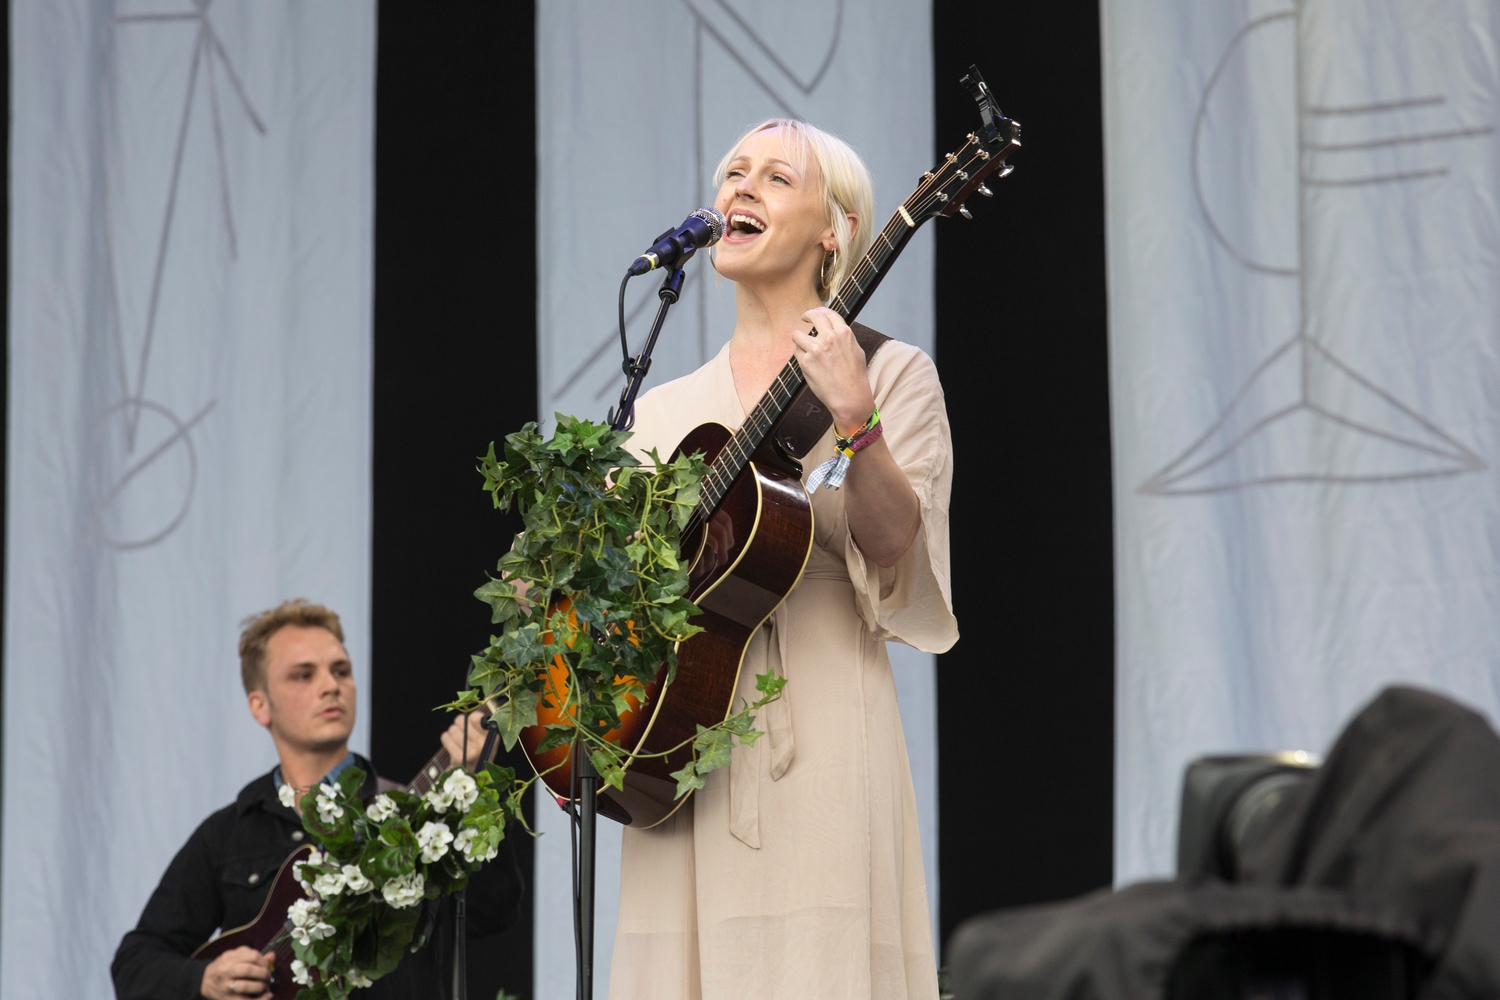 CALM announce fundraising events, with Laura Marling, Mystery Jets and more